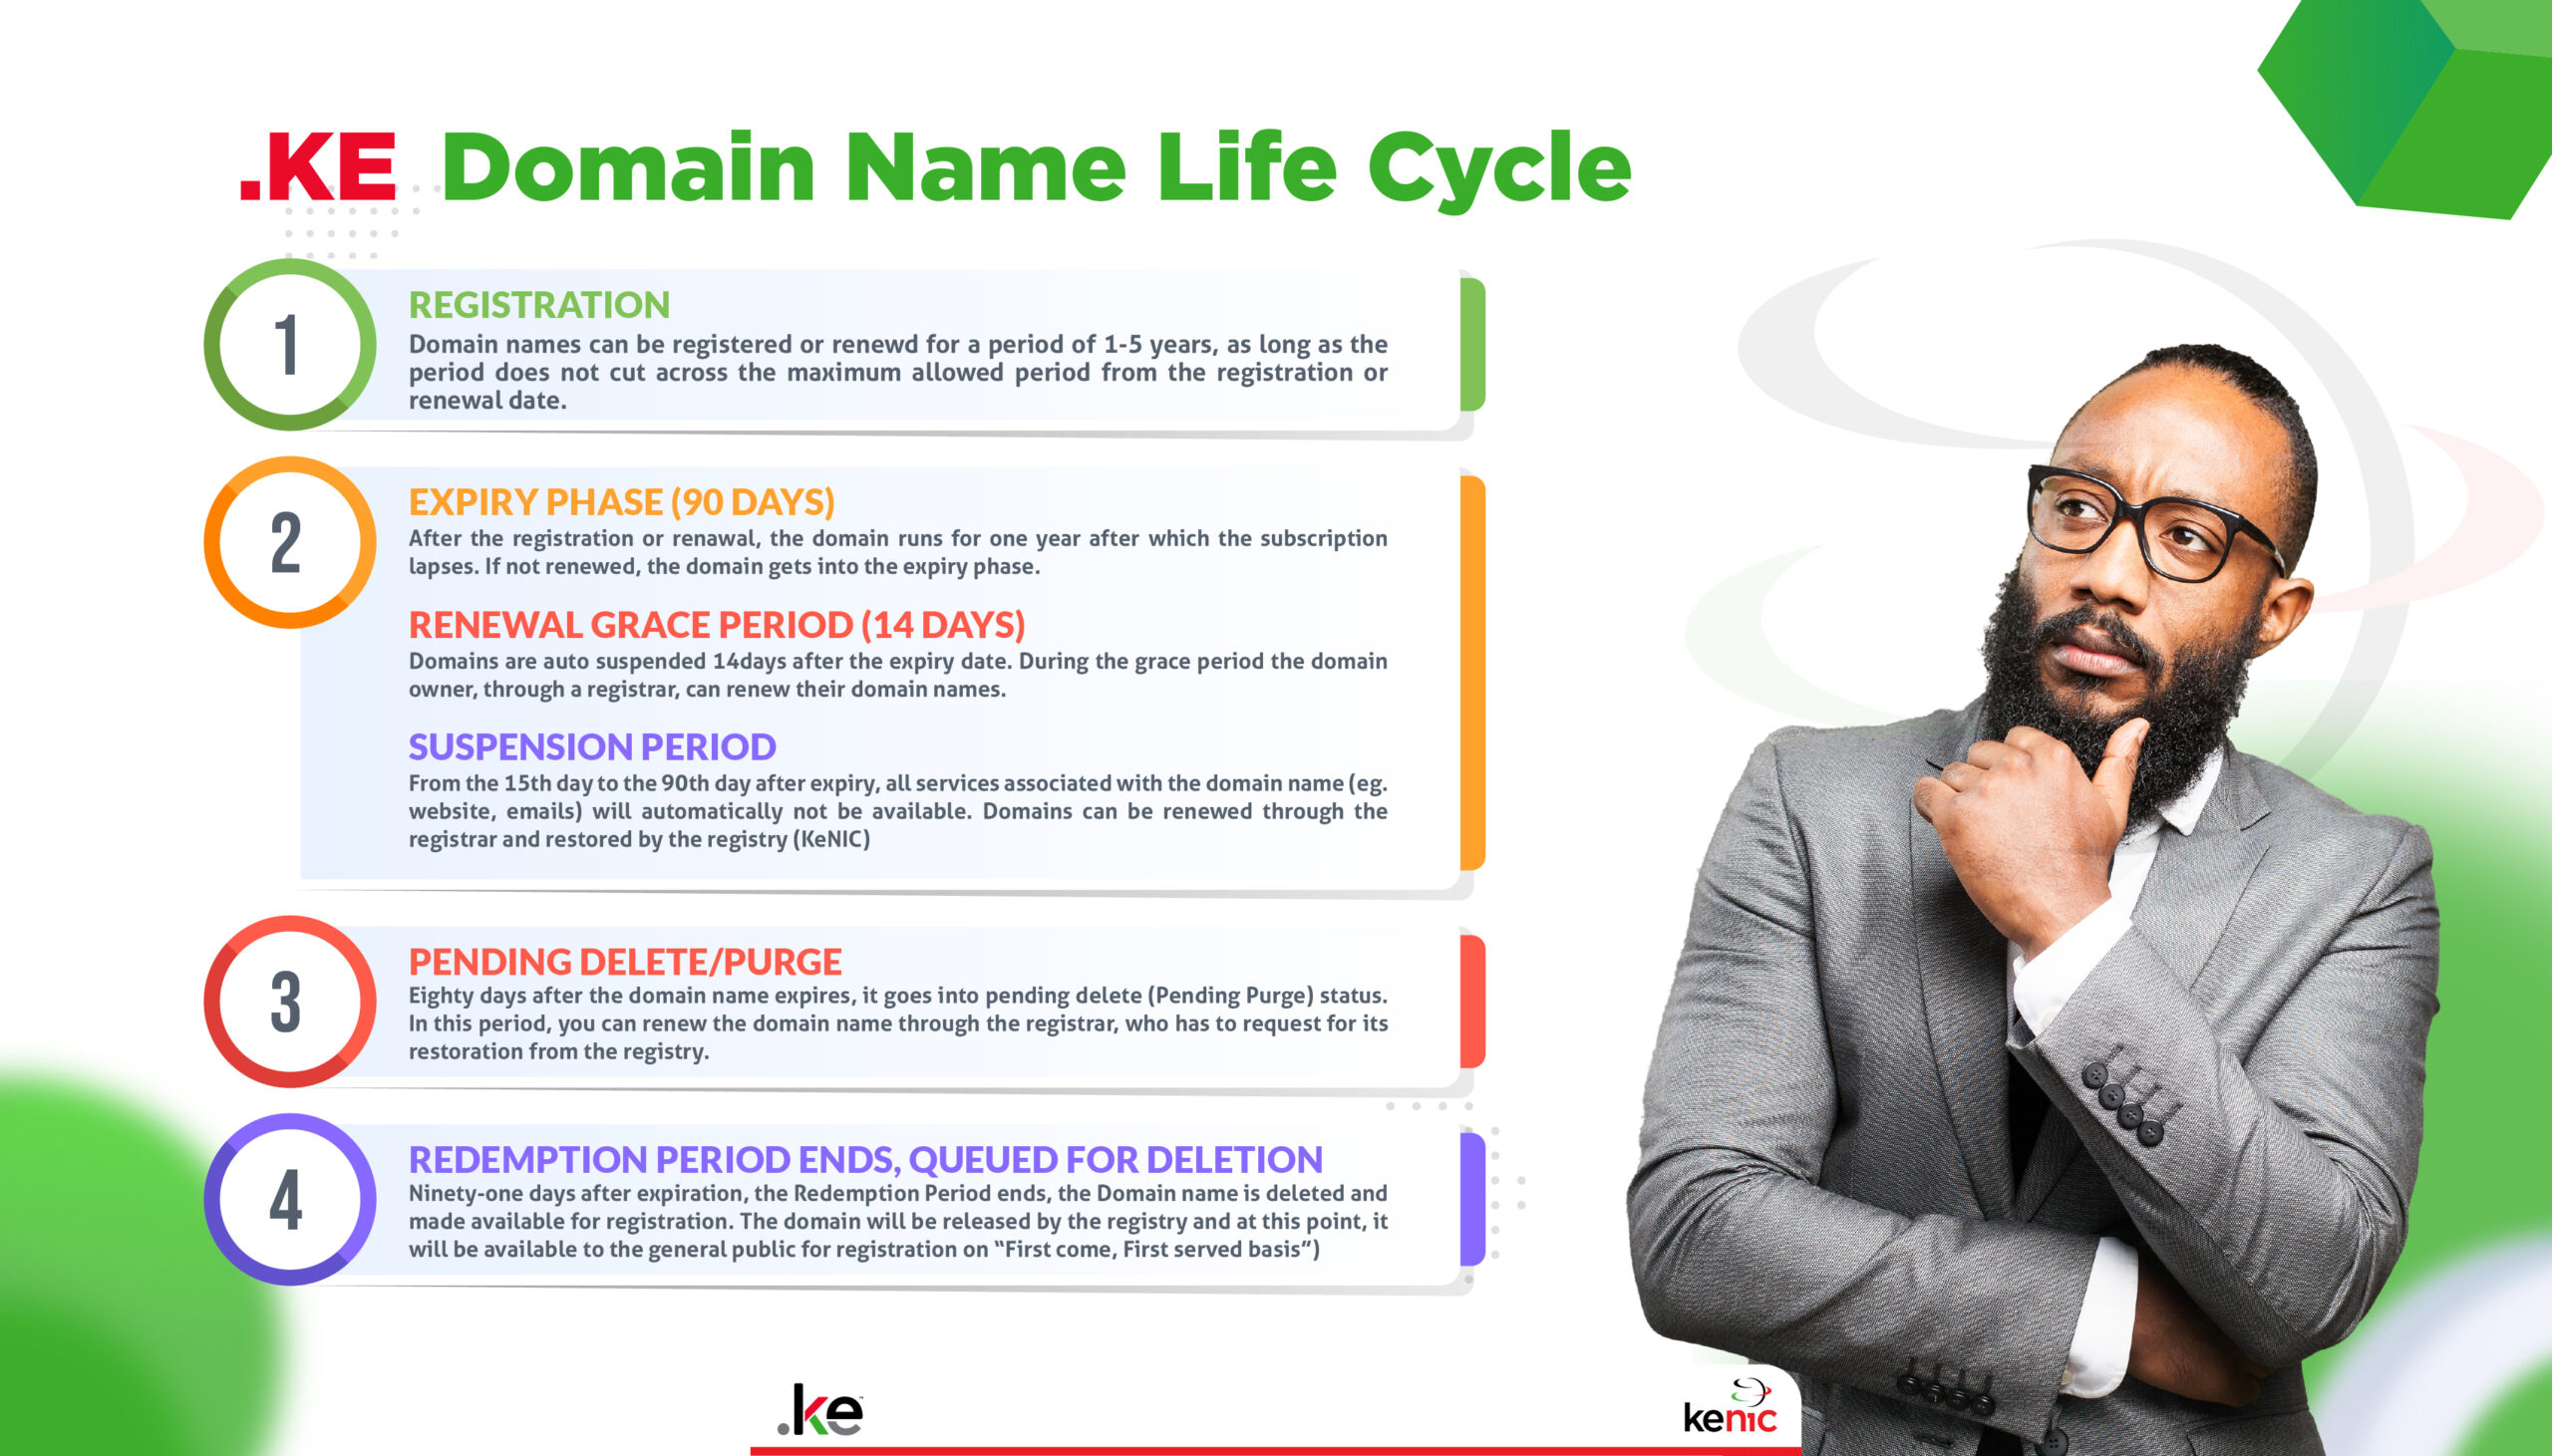 Aug 22nd Domain Life Cycle Landscape